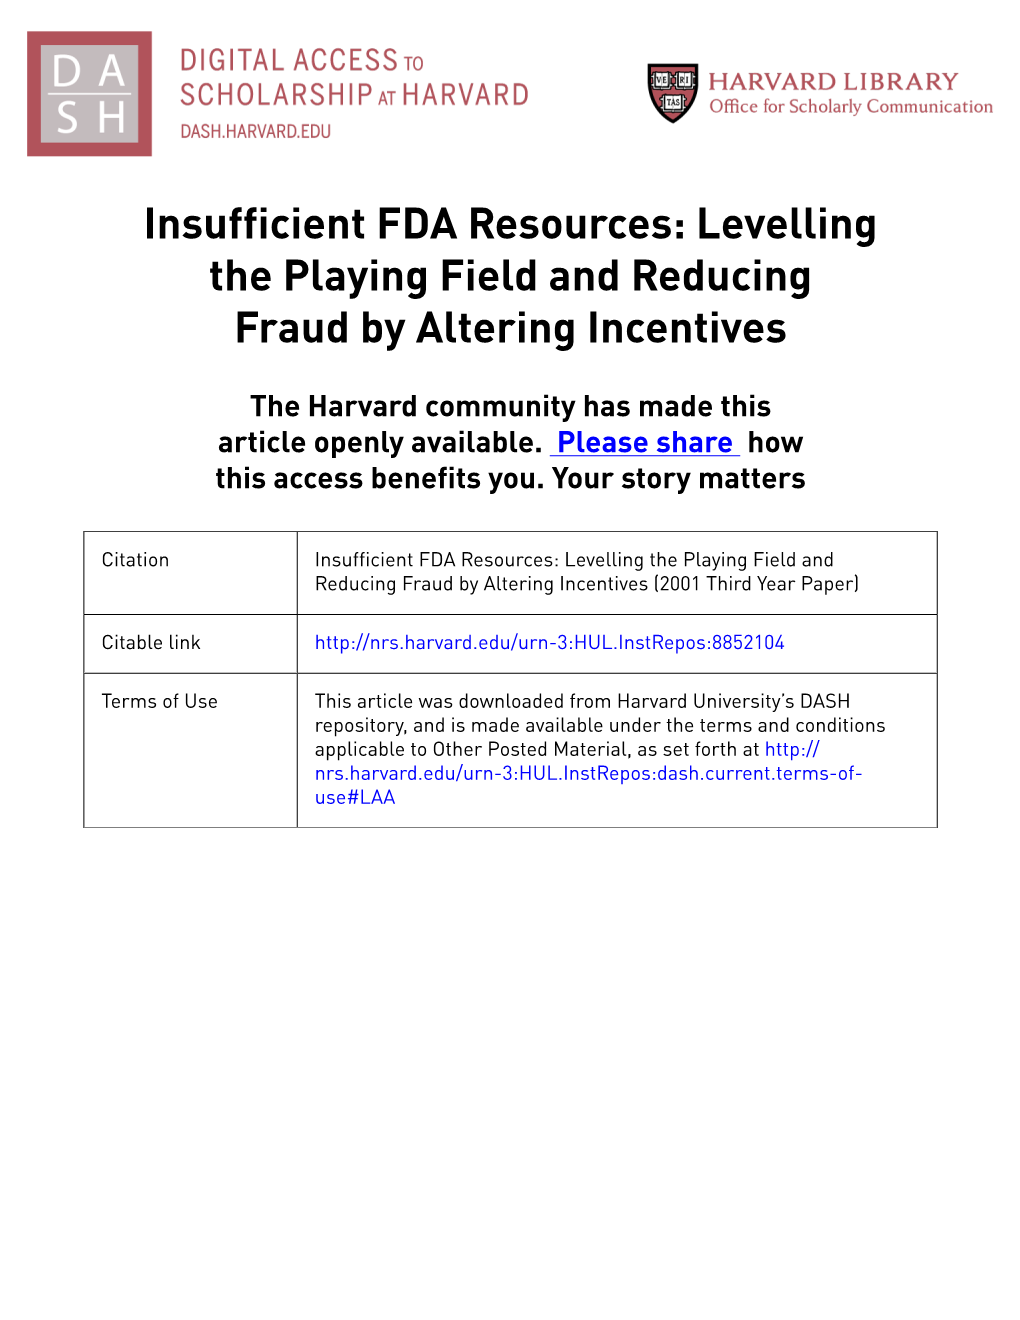 Insufficient FDA Resources: Levelling the Playing Field and Reducing Fraud by Altering Incentives